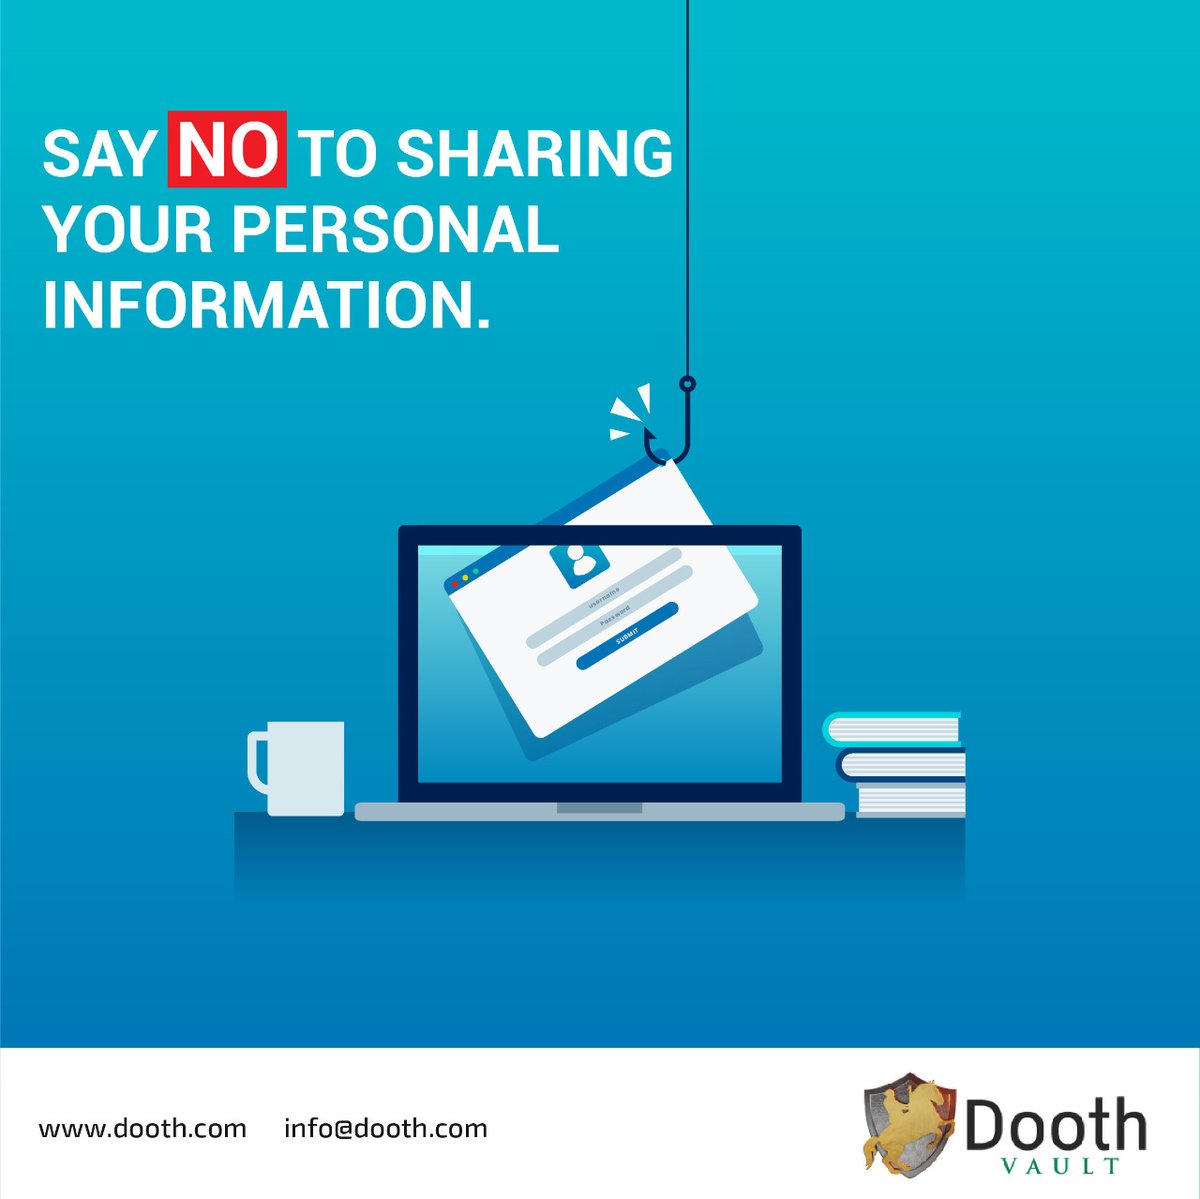 Your #personaldata is at risk!
 
How many of you are aware of this silent threat? 

Safeguard your data from #dataspoofing, #dataphishing and #databreaches with @Doothpltd 

#datasecurity #dataprivacy #dataprotection #secureddata #Dooth